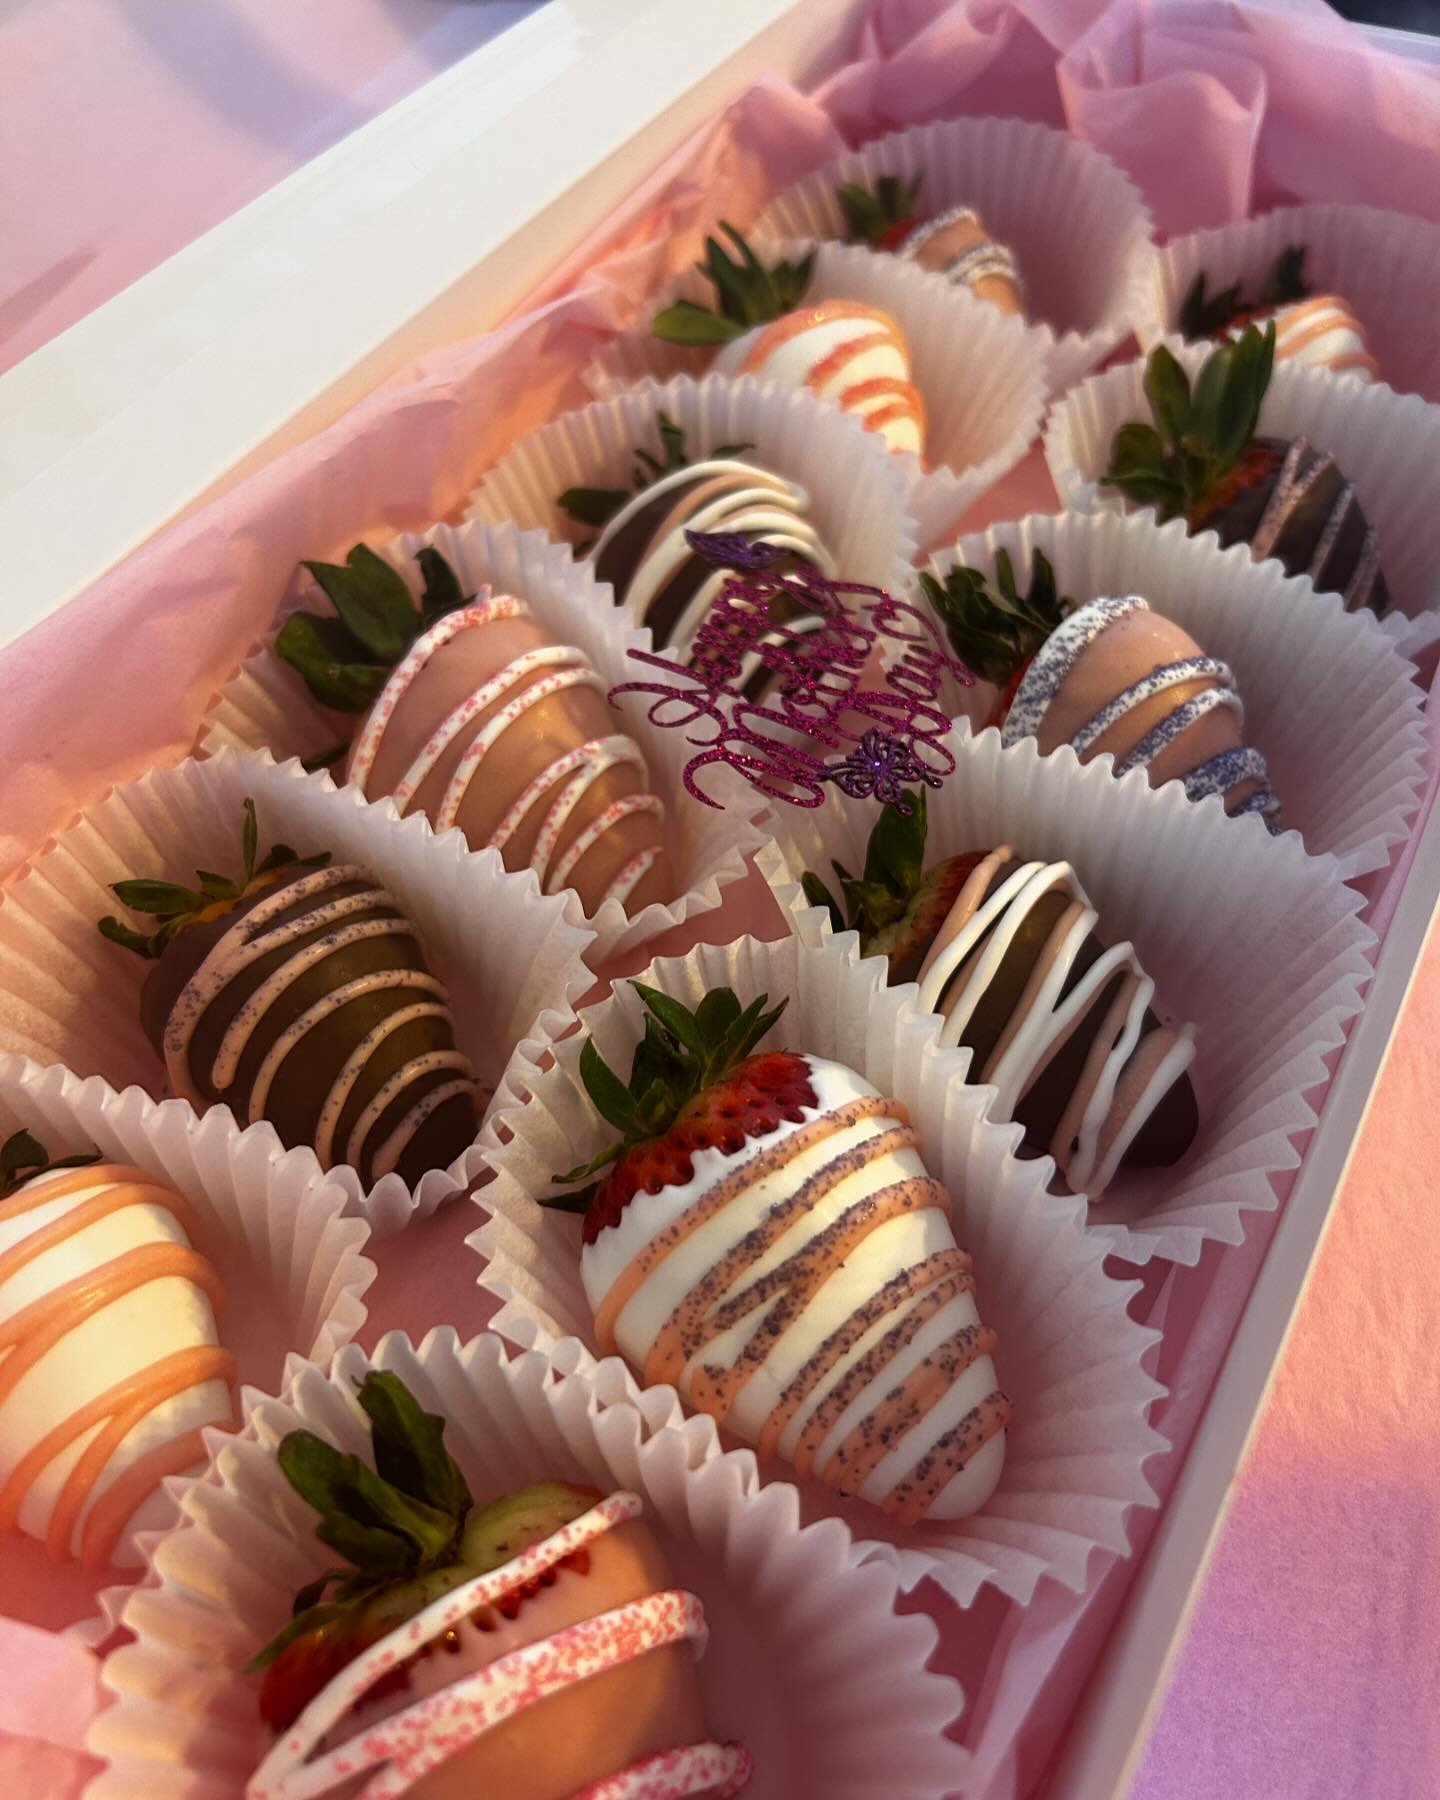 Available tomorrow! Lots of beautiful and delicious chocolate dipped strawberries for Mother&rsquo;s Day ! 
We will have 4 packs, 6 packs and full dozens ! 
And mini cheesecakes and so much more !!

Open Saturday 11am-8pm
491 s main st suite 6 cedar 